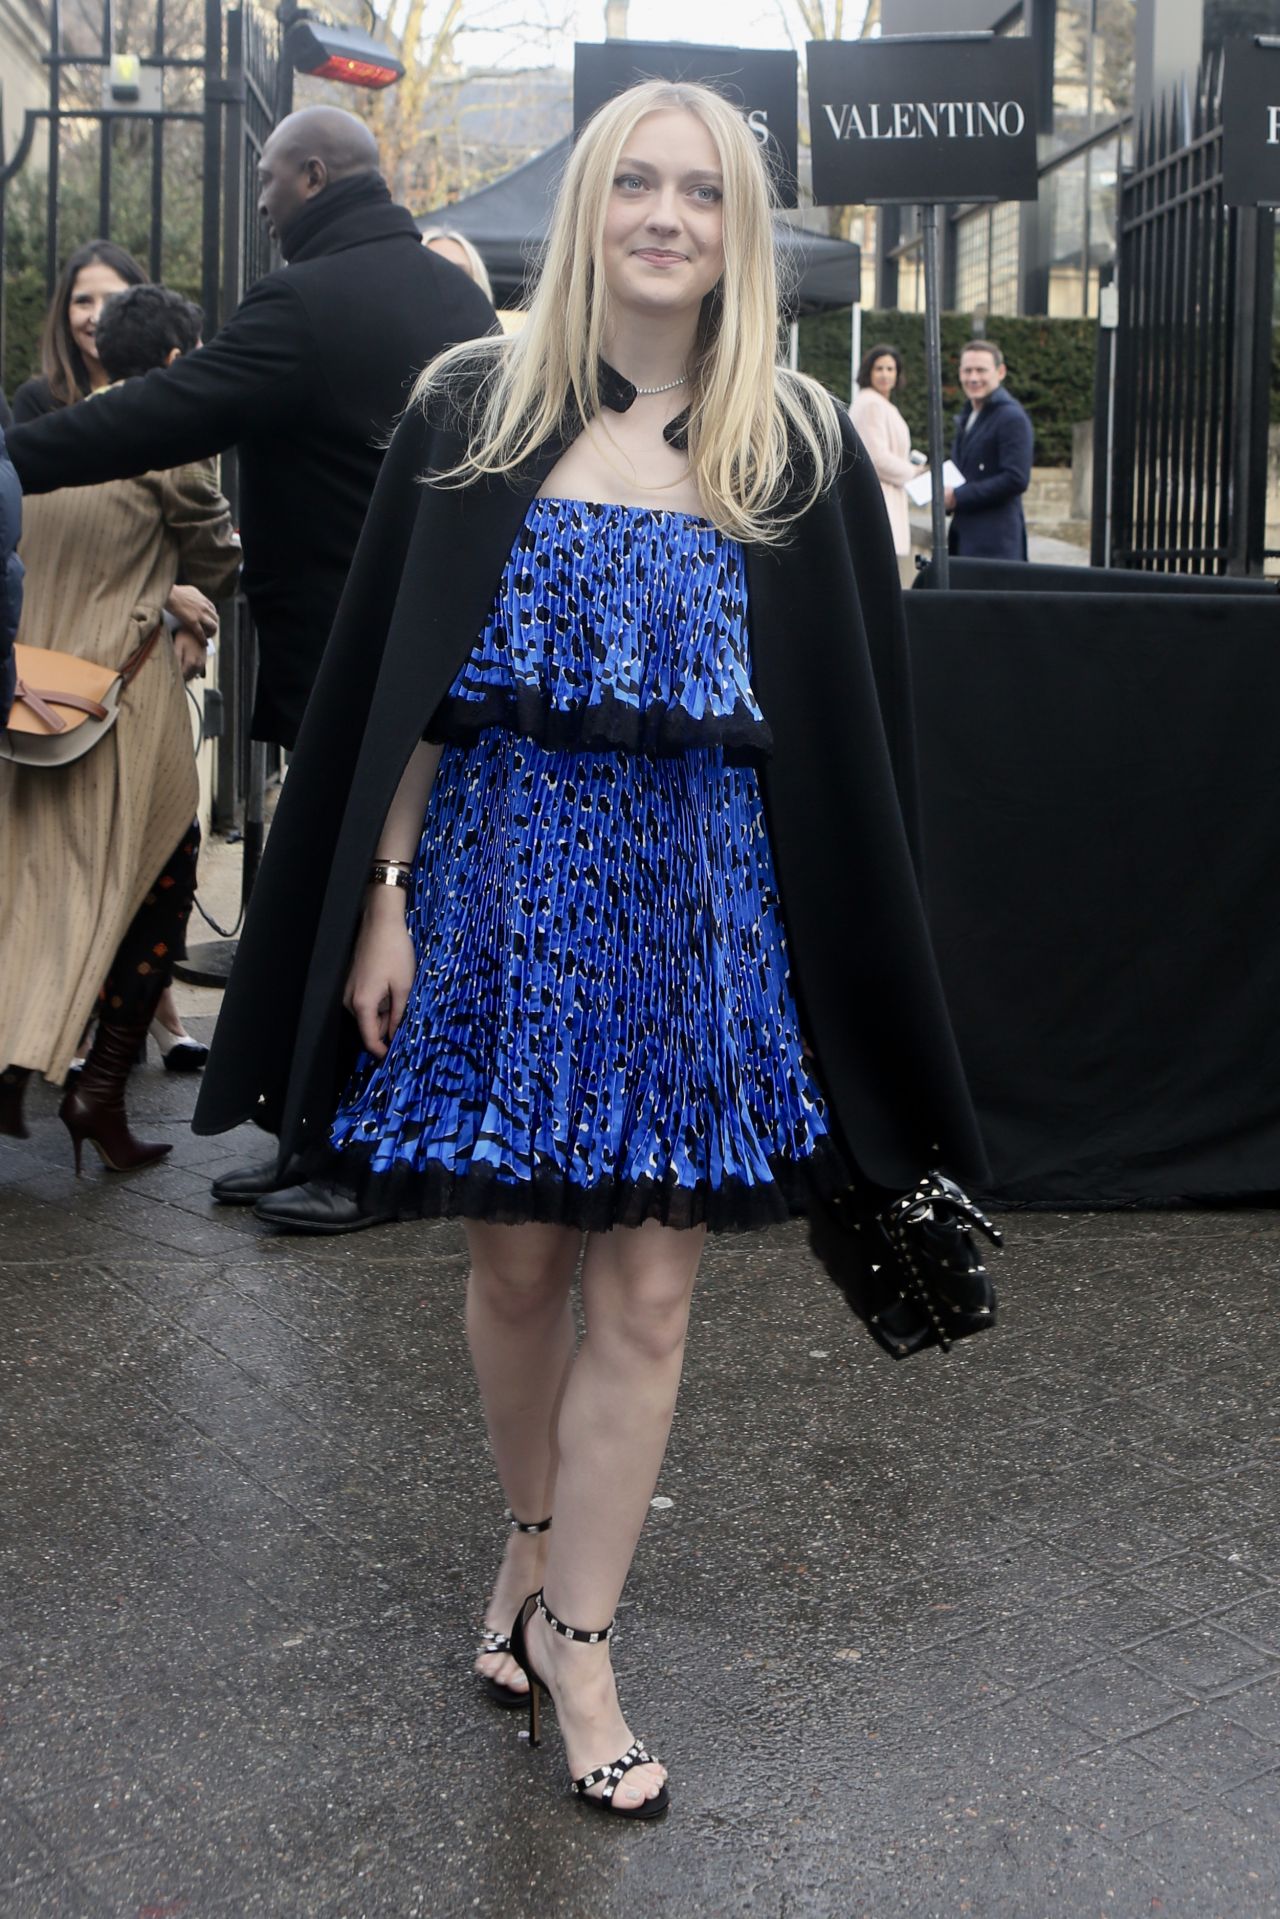 Valentino - Dakota Fanning captured before the Valentino Fall/Winter  2018-19 Show in Paris wearing a leopard statement dress from the Valentino  Fall 2018 Collection with the latest VLTN Valentino Garavani Candystud bag.